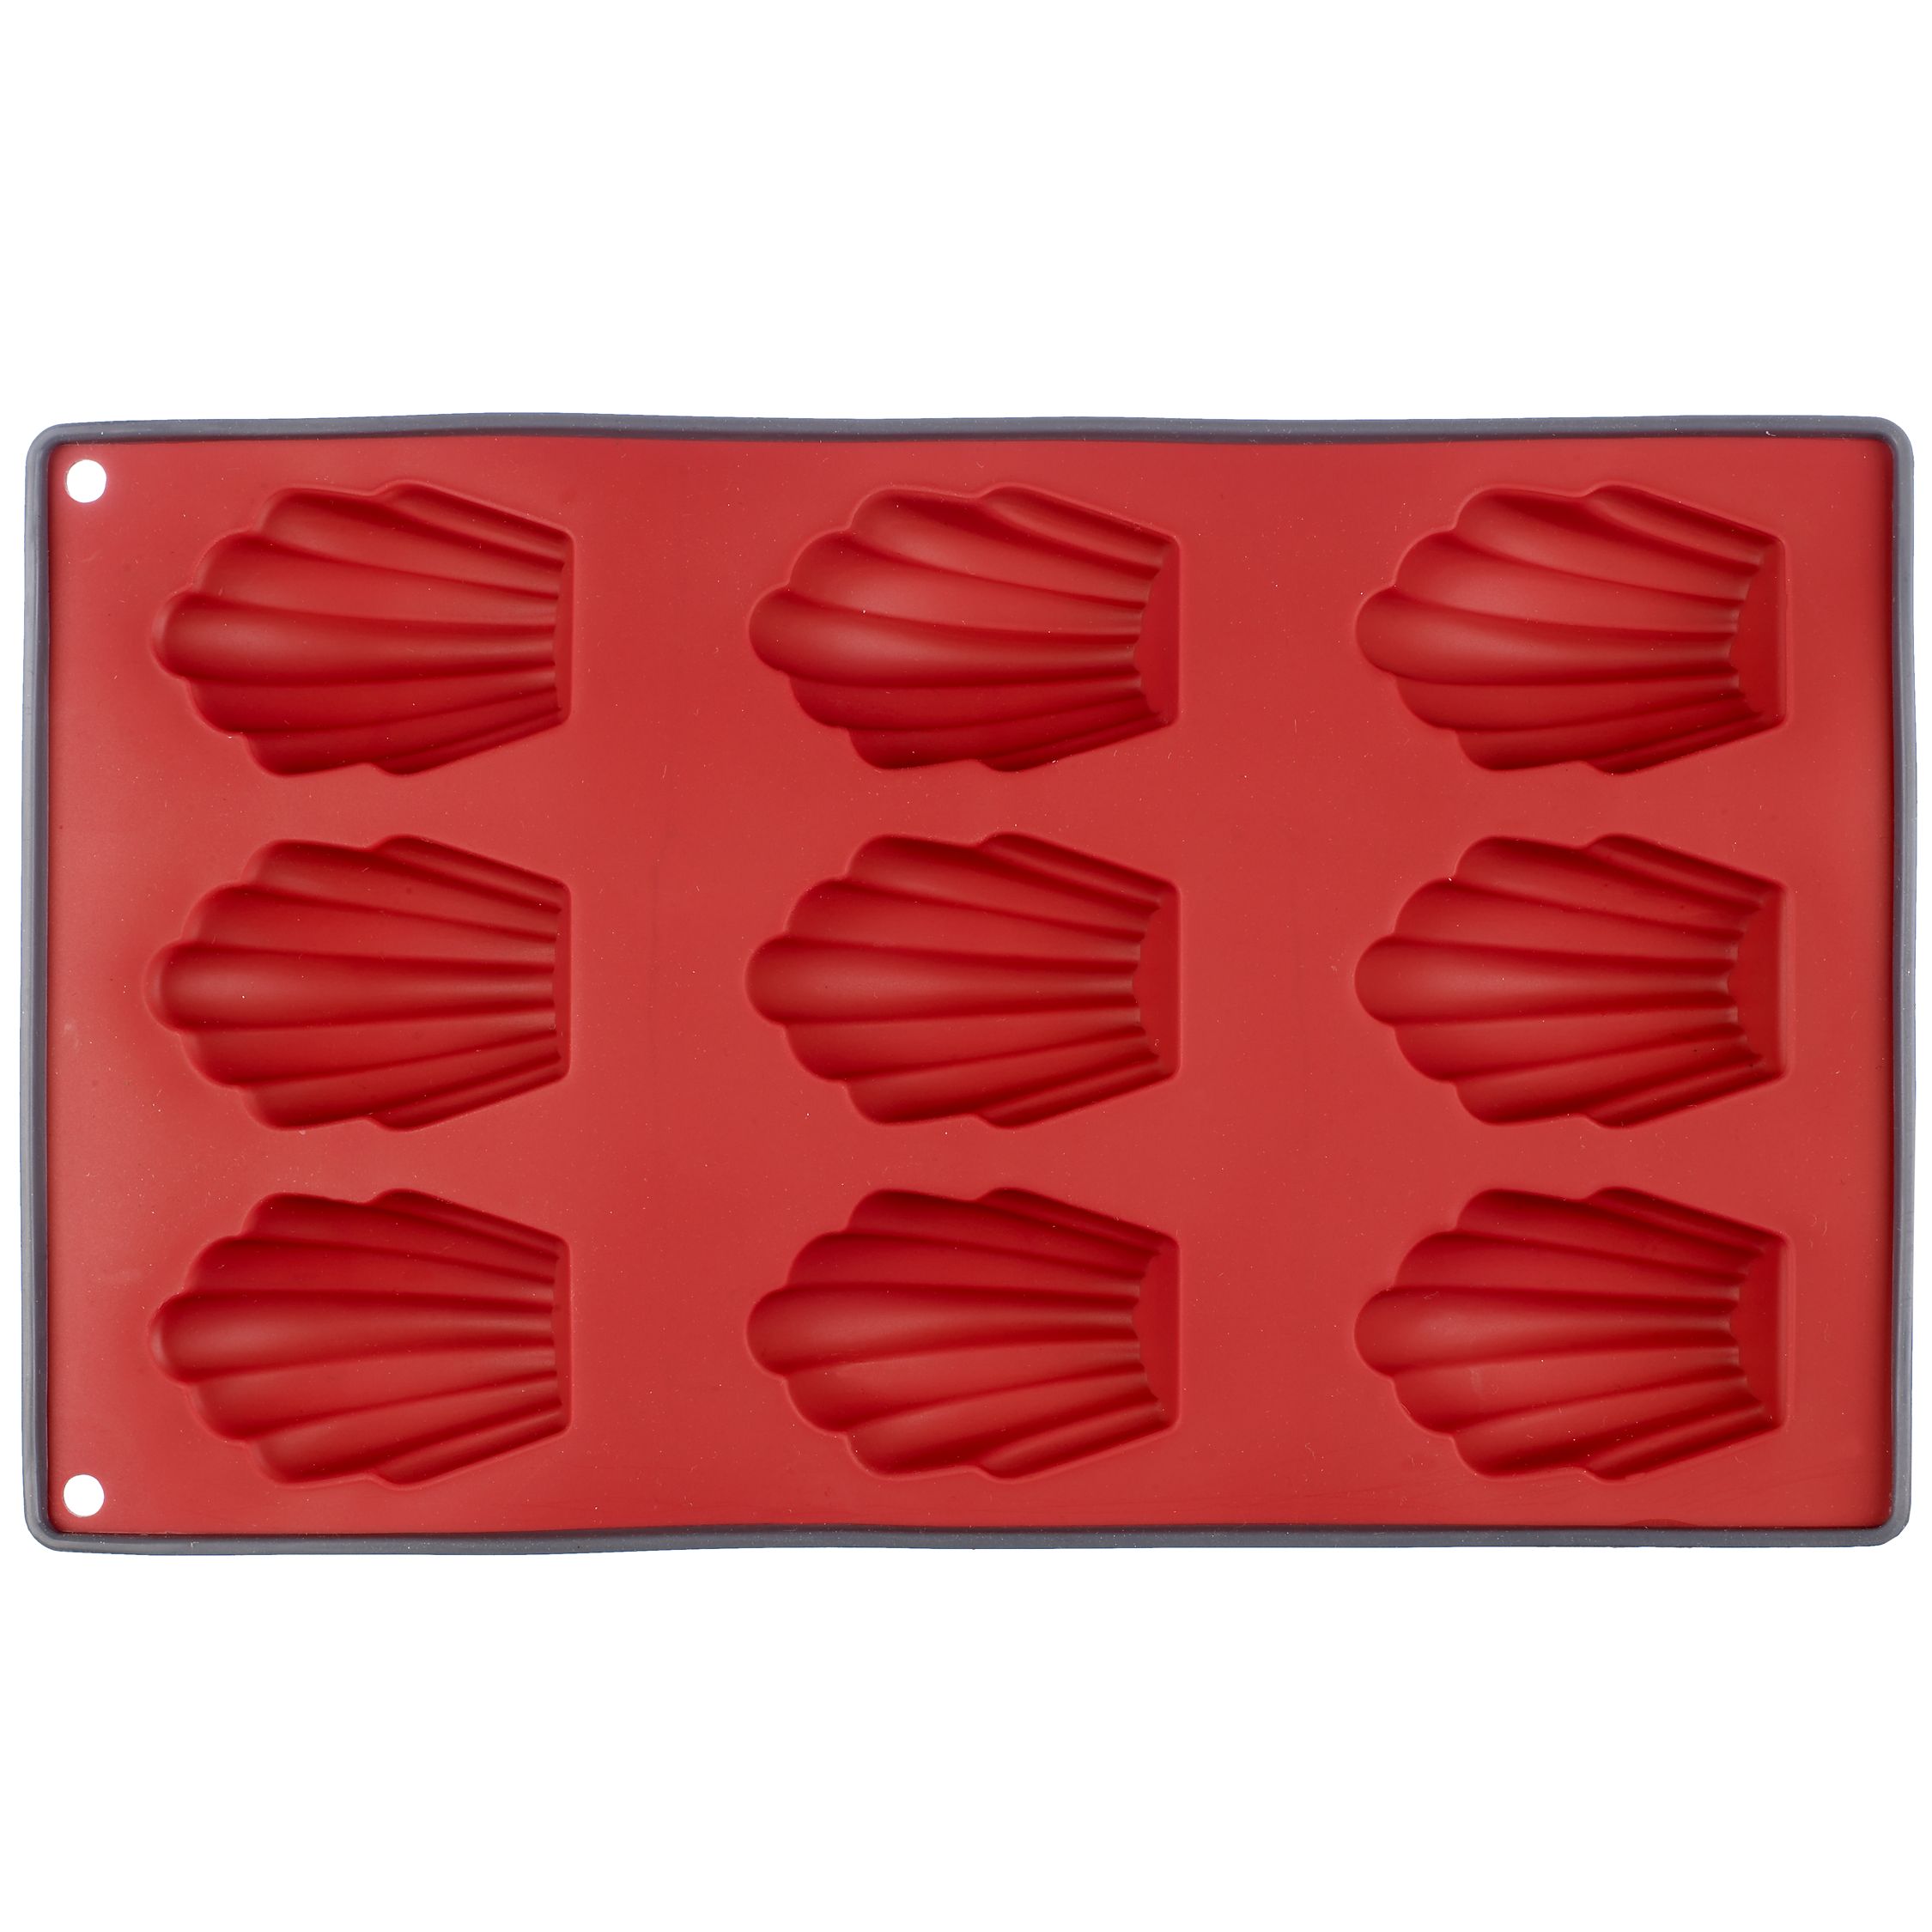 John Lewis 9 Cup Madeleine Mould, Red